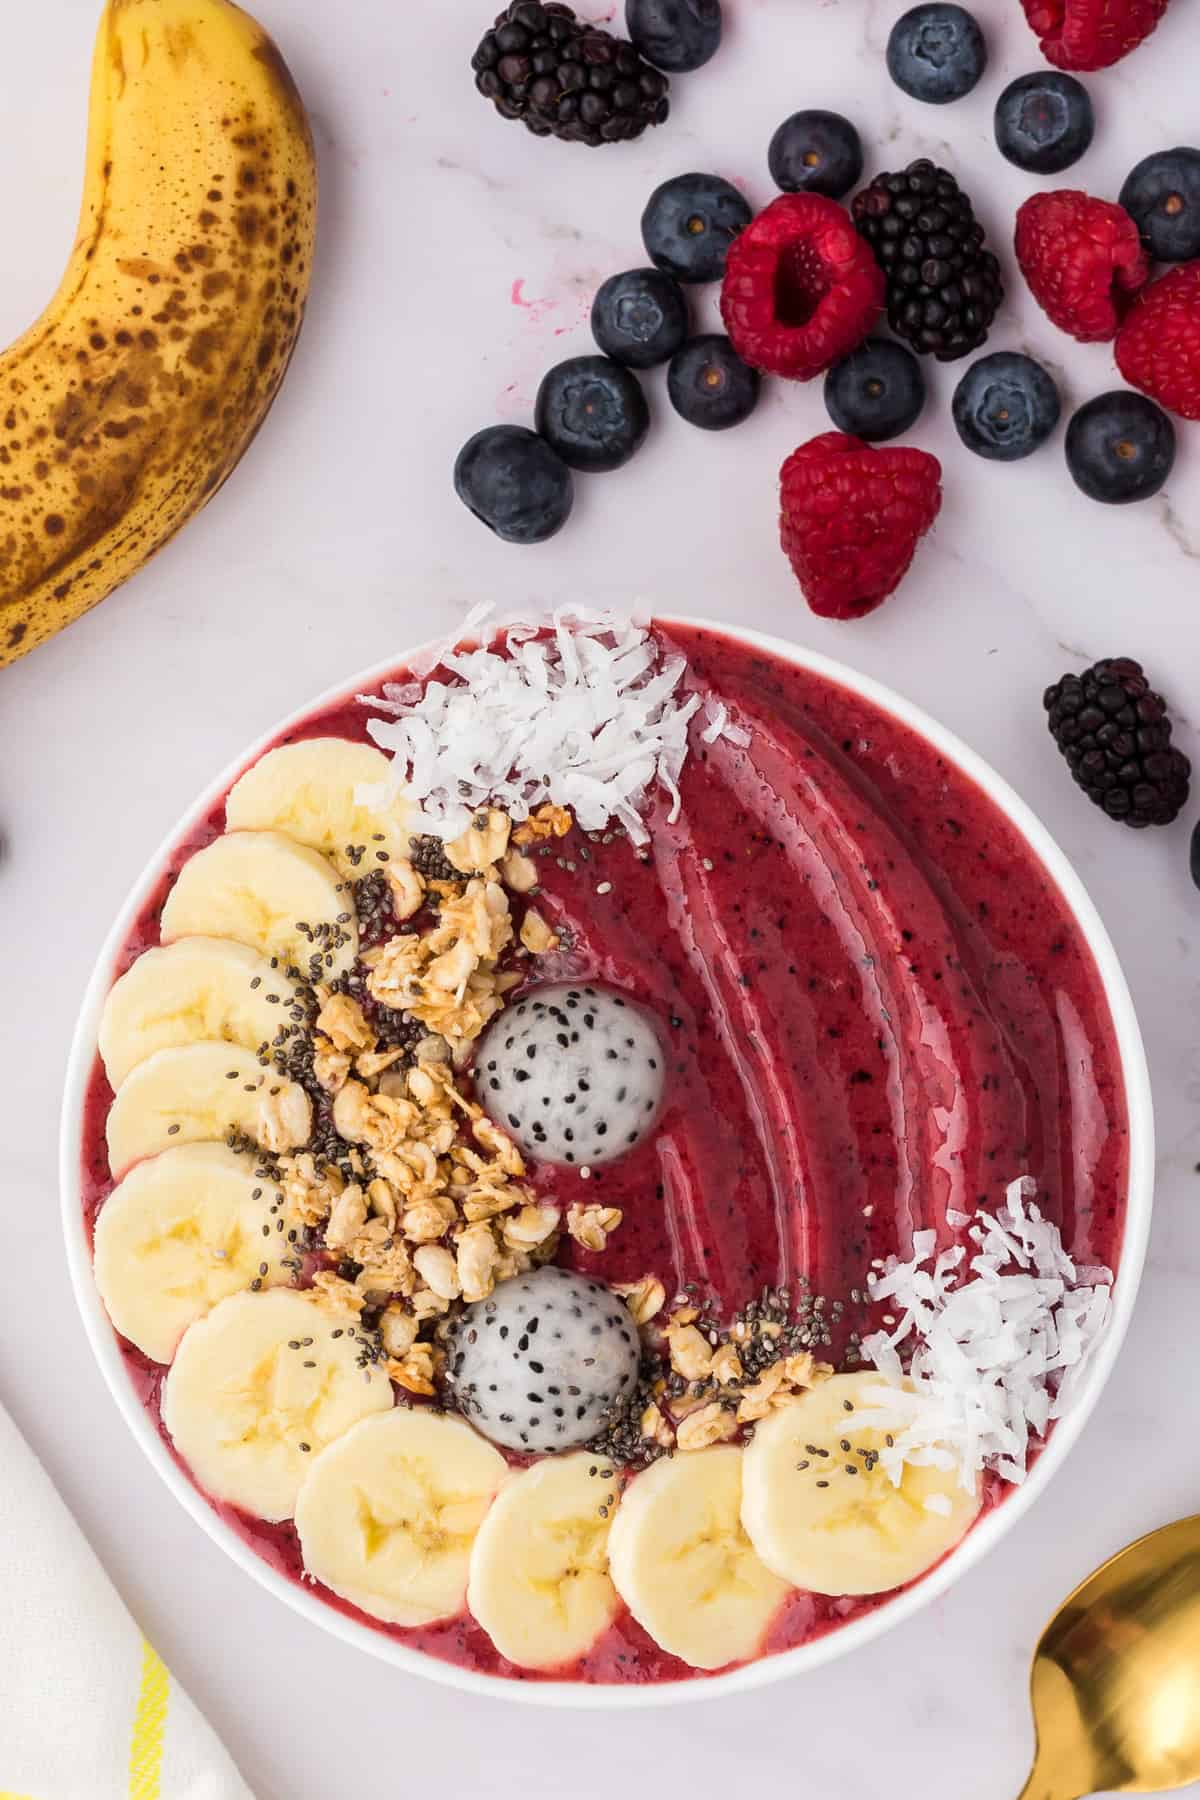 Smoothie bowl with toppings added.